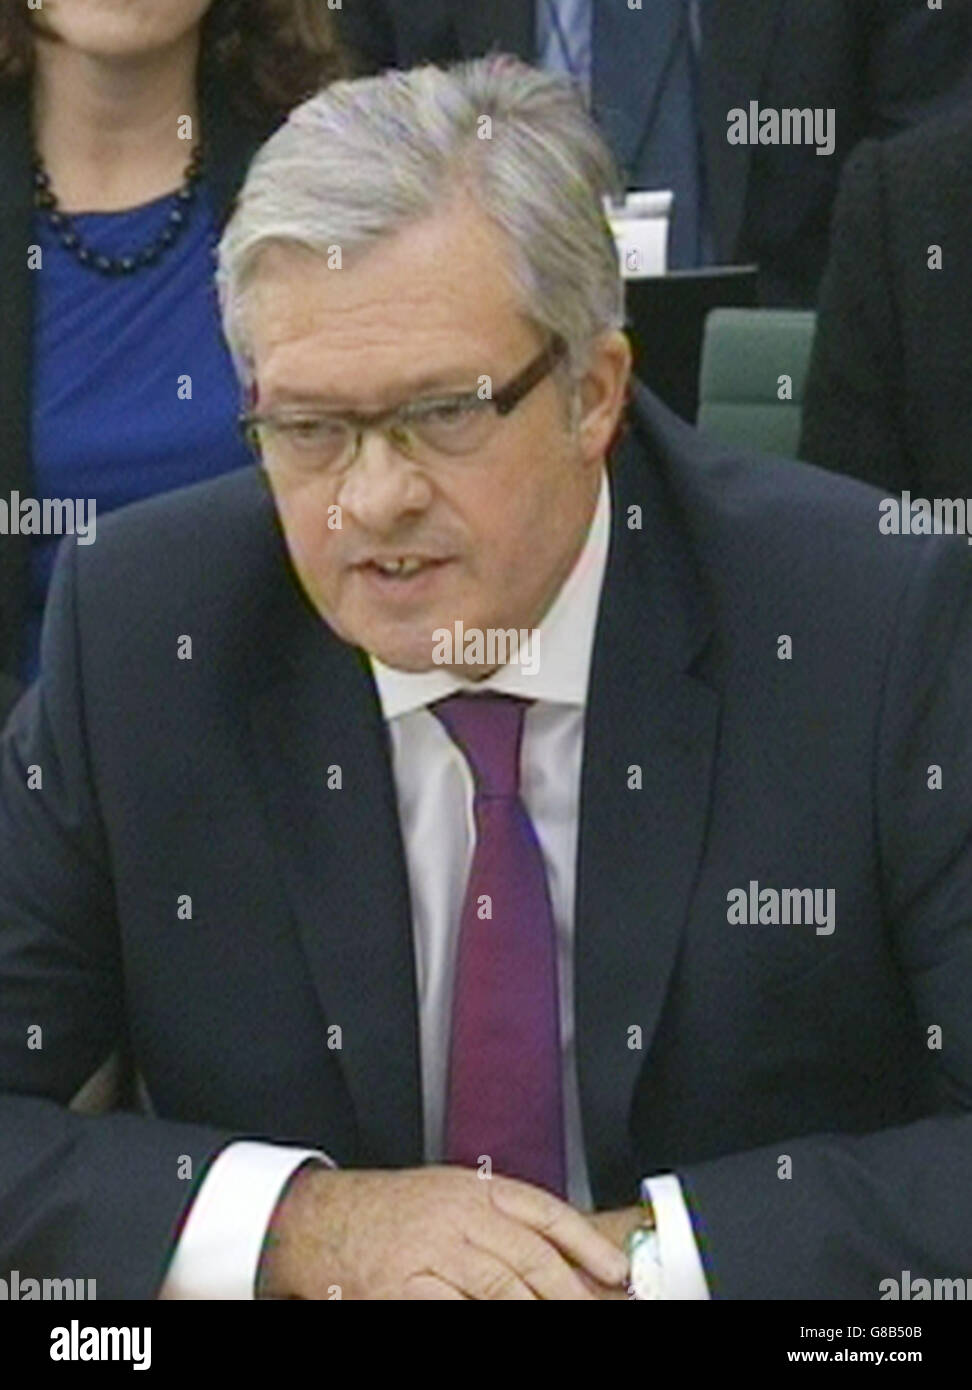 Paul Willis, the managing director of Volkswagen Group UK, answers questions during a Transport Select Committee on the VW diesel emissions scandal, at Portcullis House, Westminster. Stock Photo